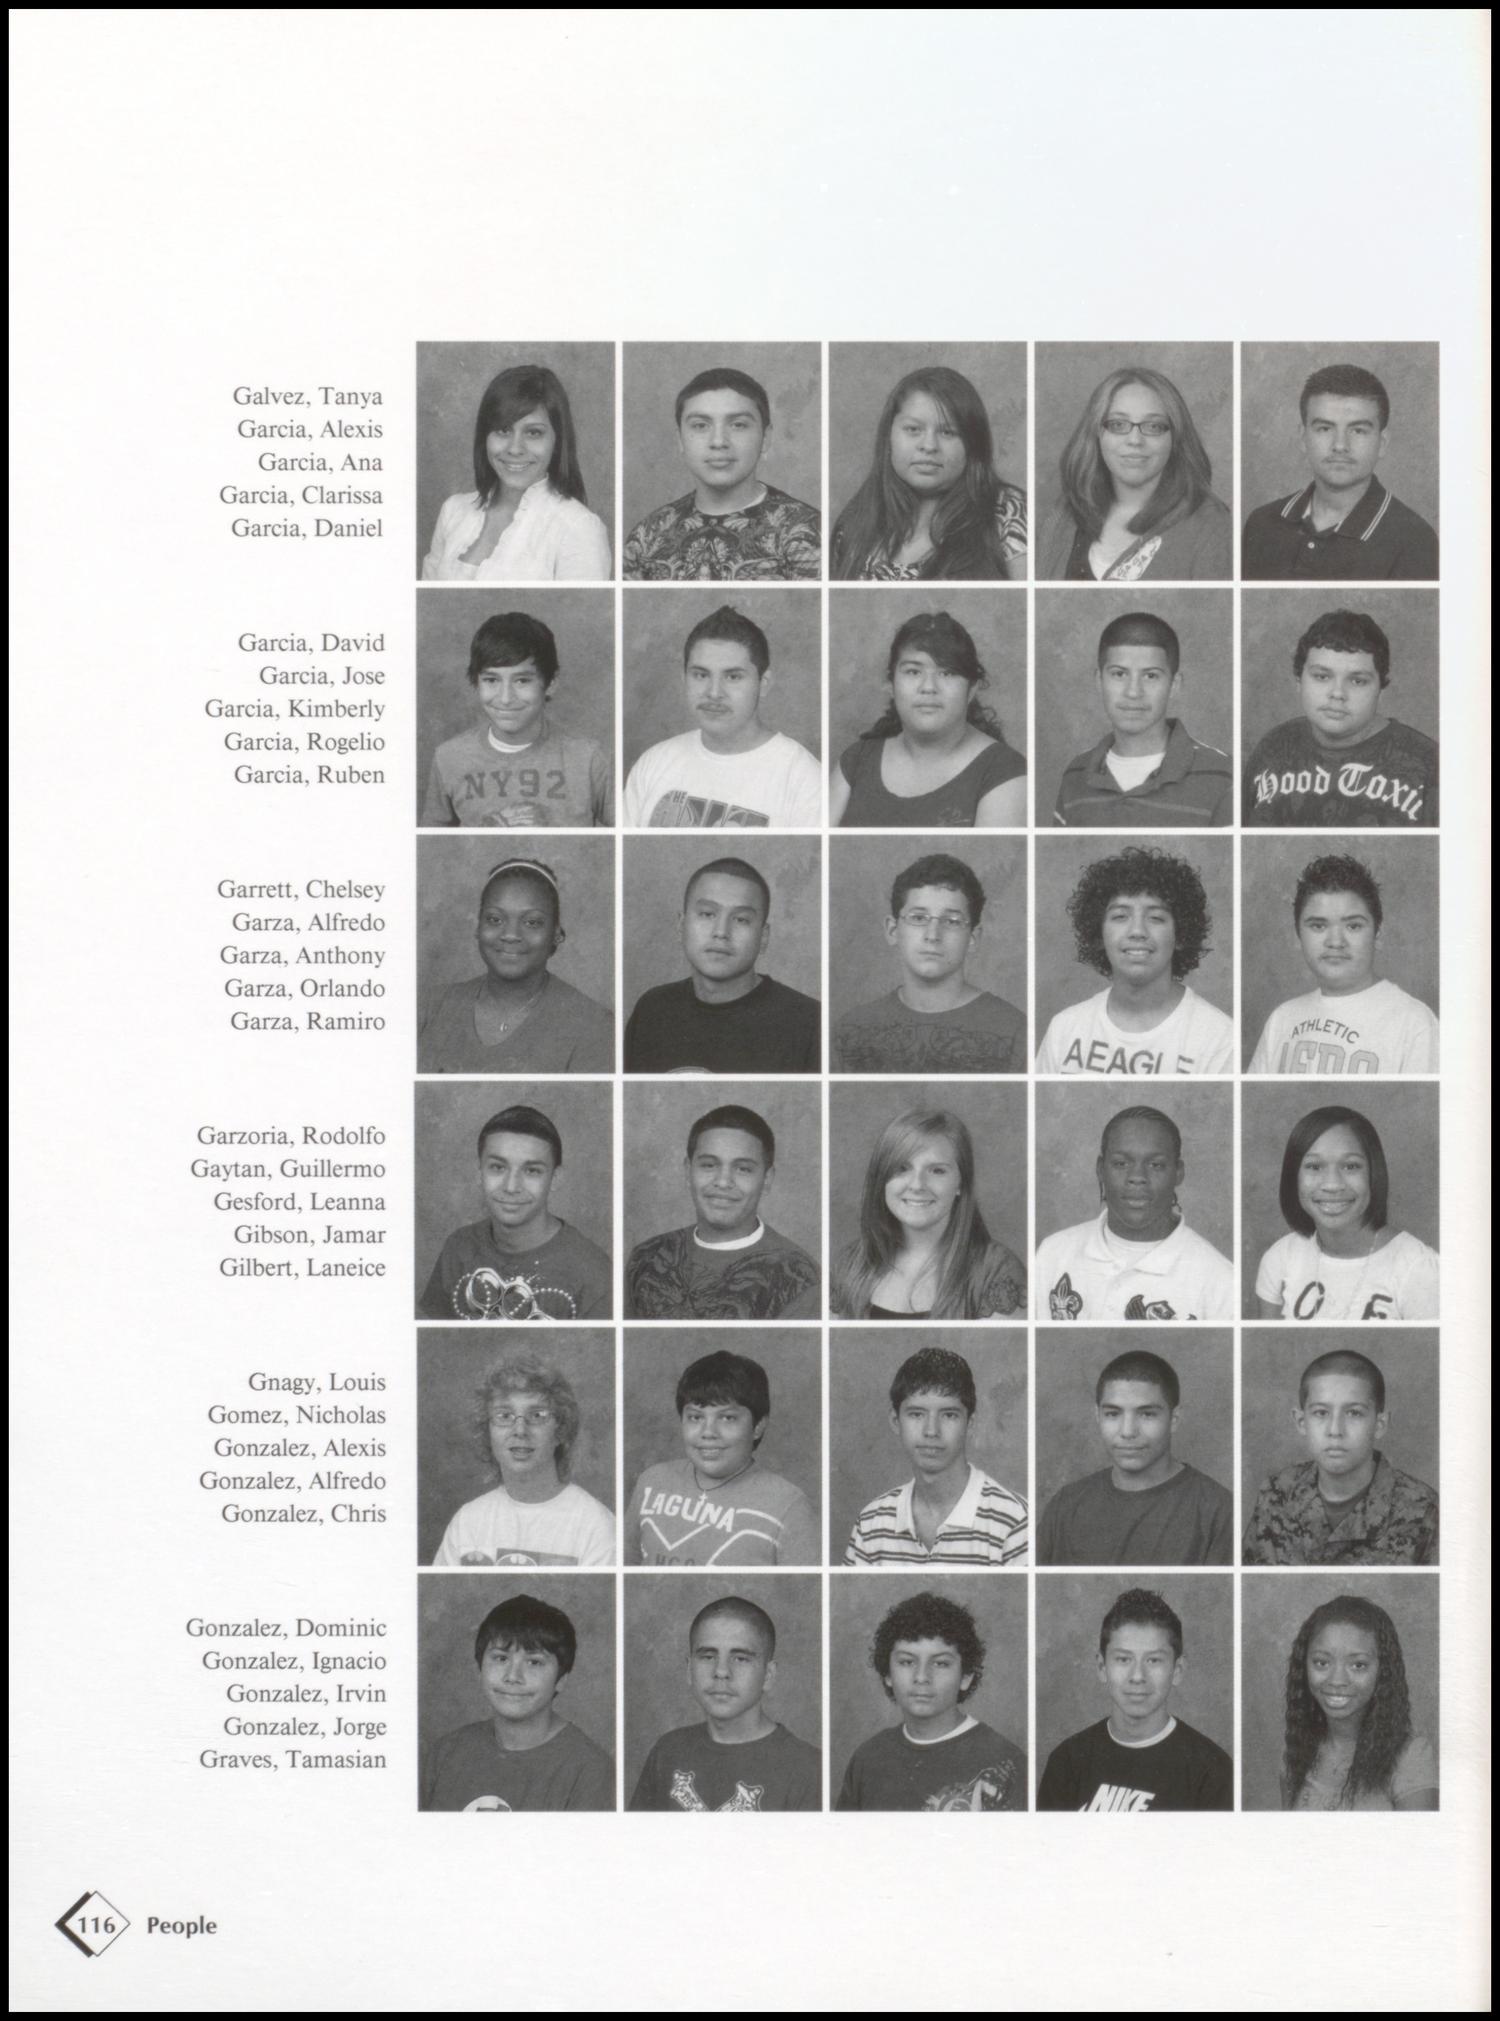 The Governor, Yearbook of Ross S. Sterling High School, 2010
                                                
                                                    116
                                                